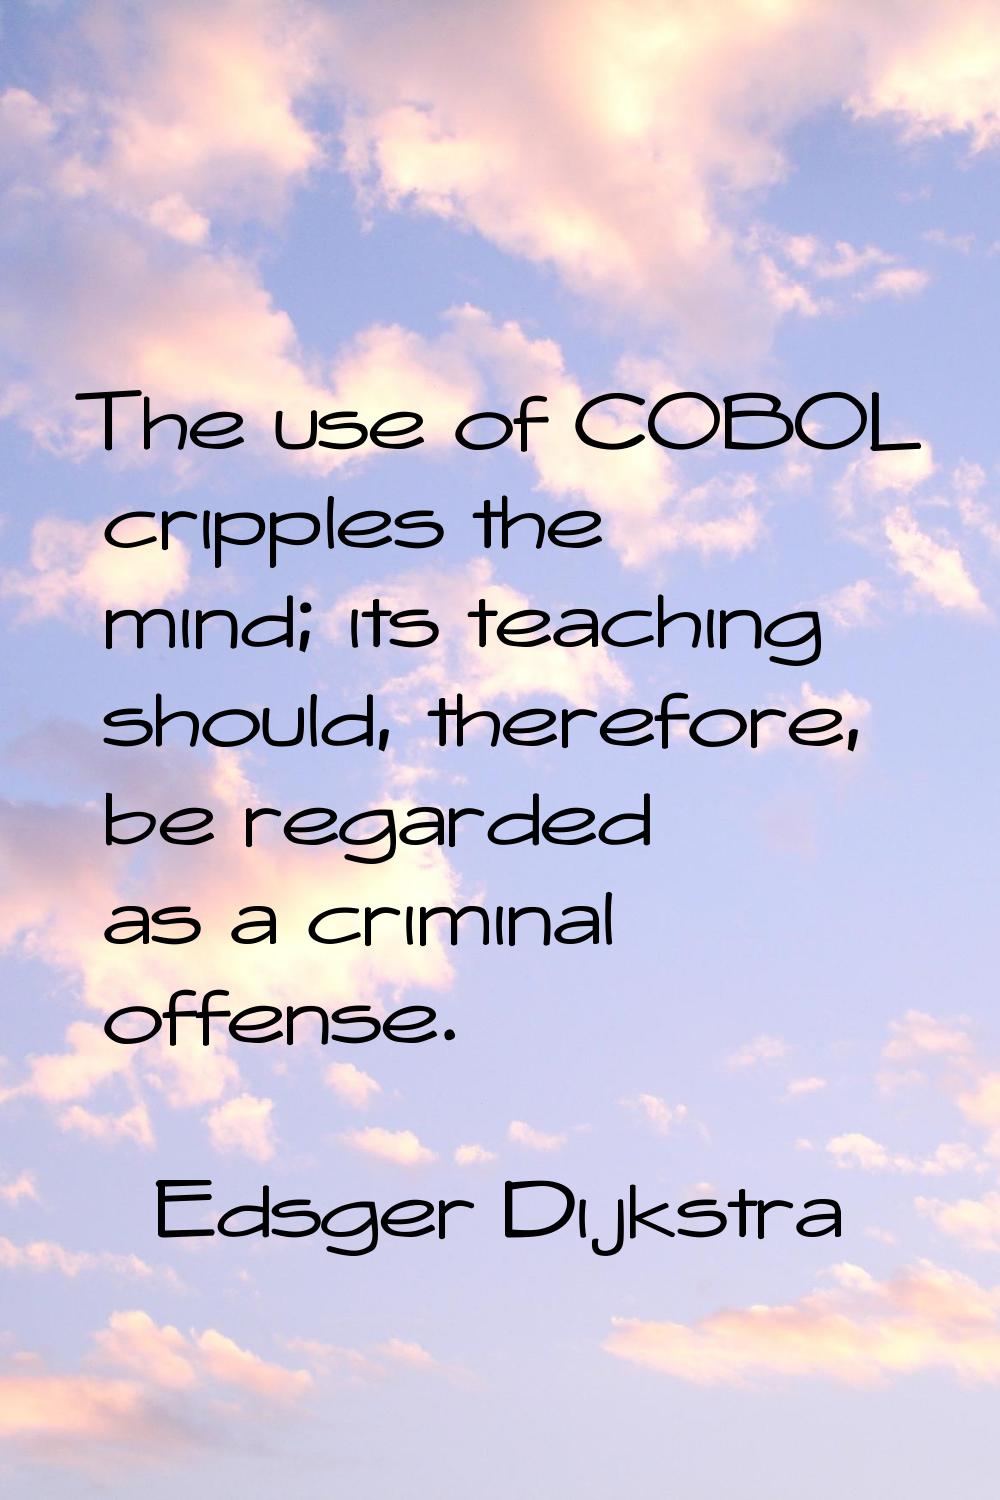 The use of COBOL cripples the mind; its teaching should, therefore, be regarded as a criminal offen